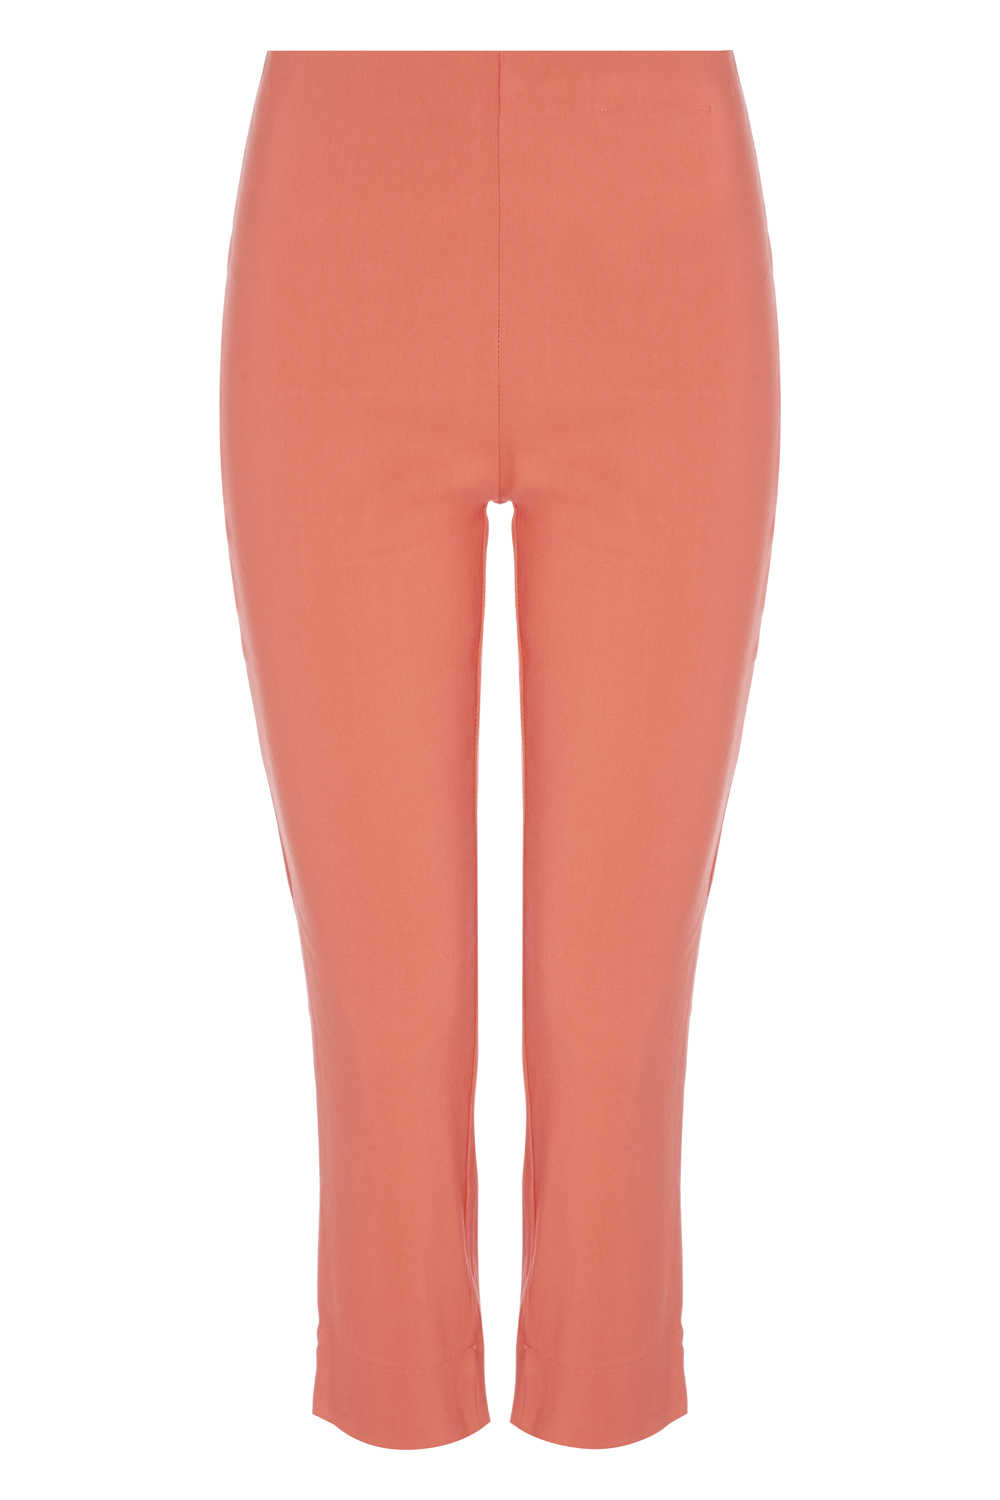 CORAL Bengaline Cropped Trousers, Image 3 of 5